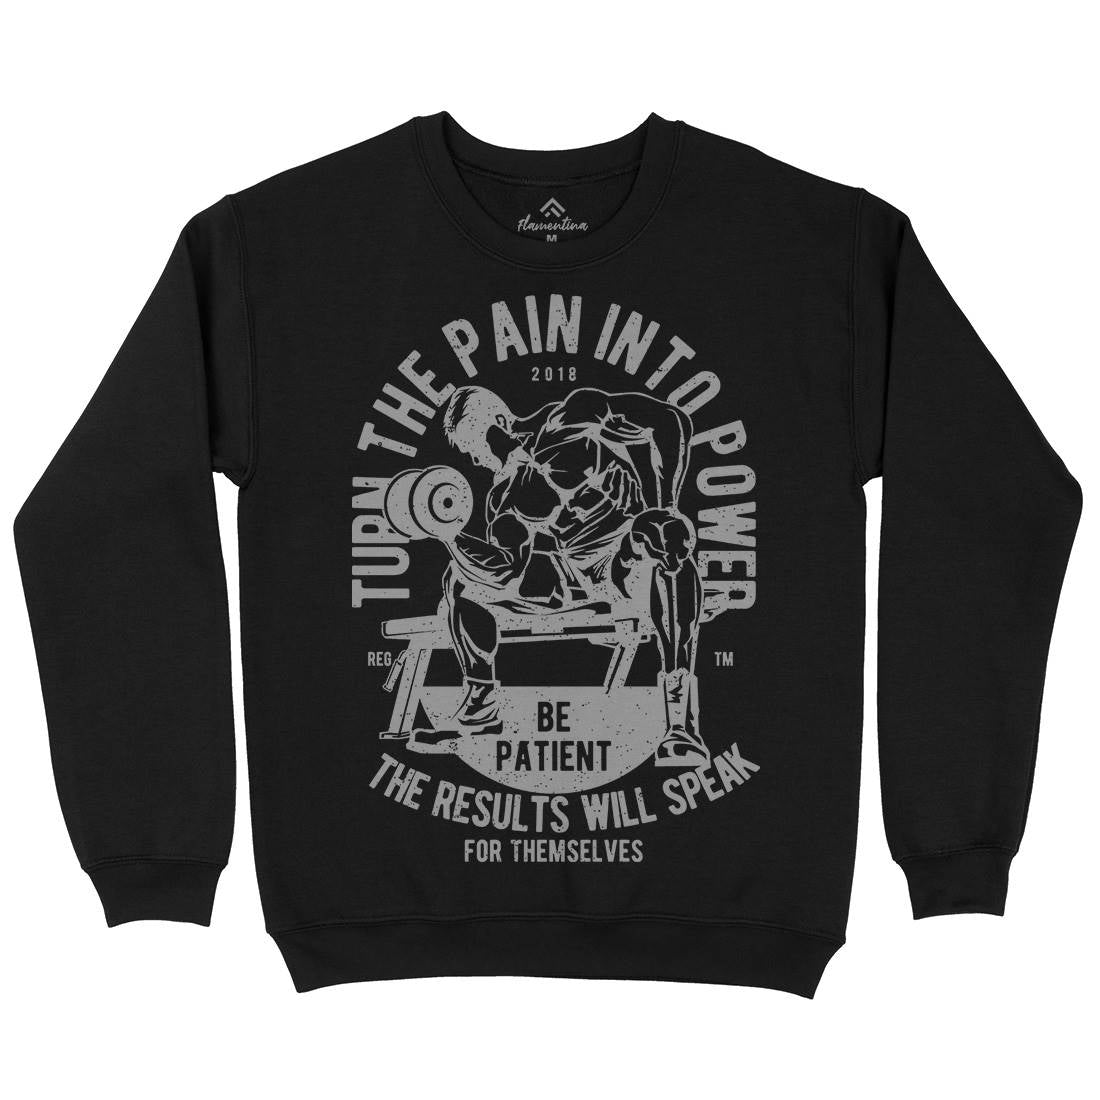 Turn The Pain Into Power Mens Crew Neck Sweatshirt Gym A780